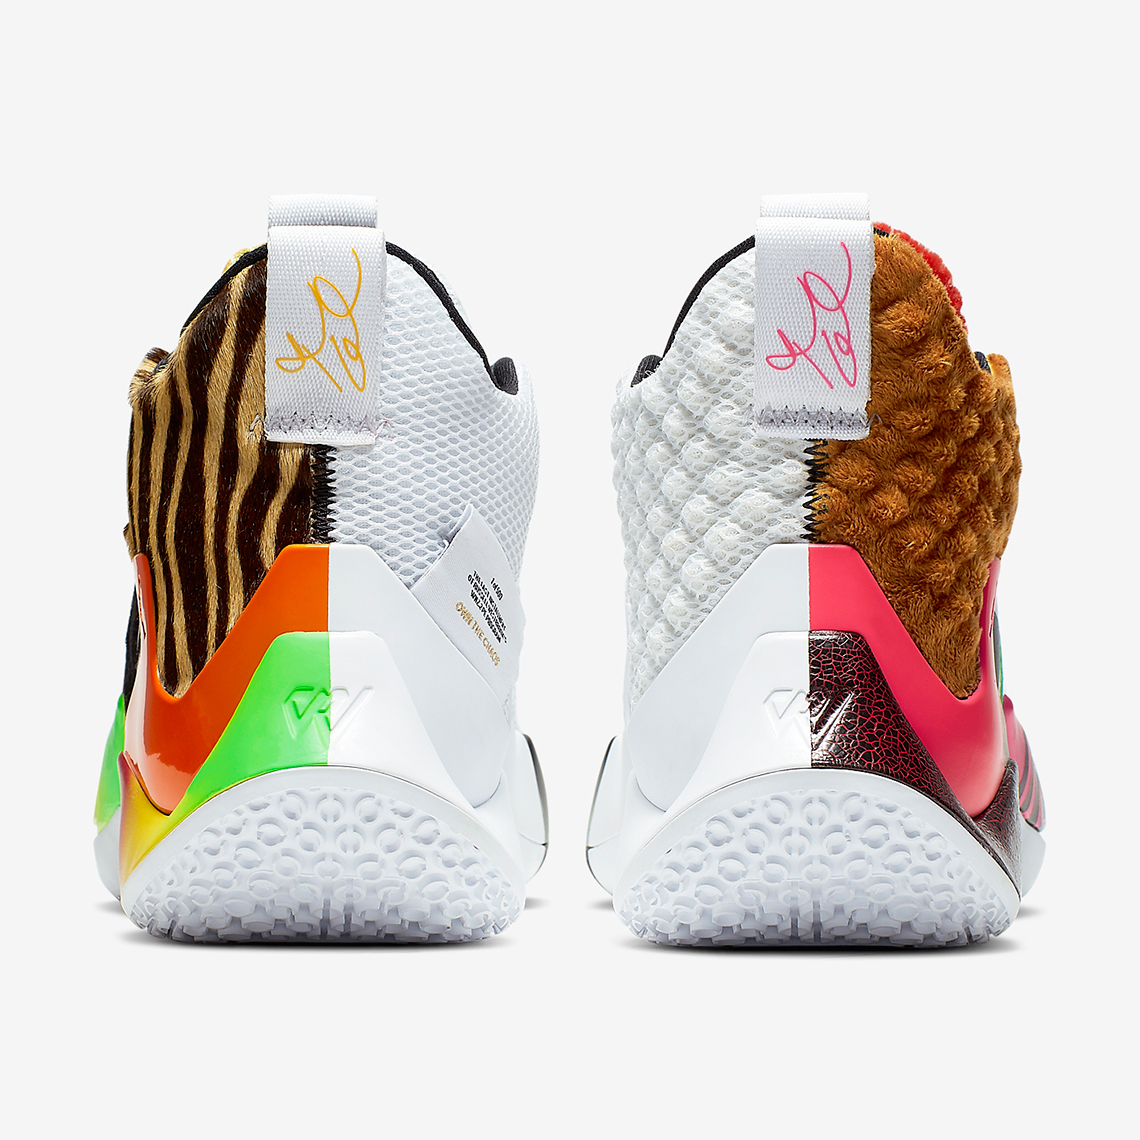 Jordan Why Not Zer0 2 Own The Chaos Ct5786 900 3